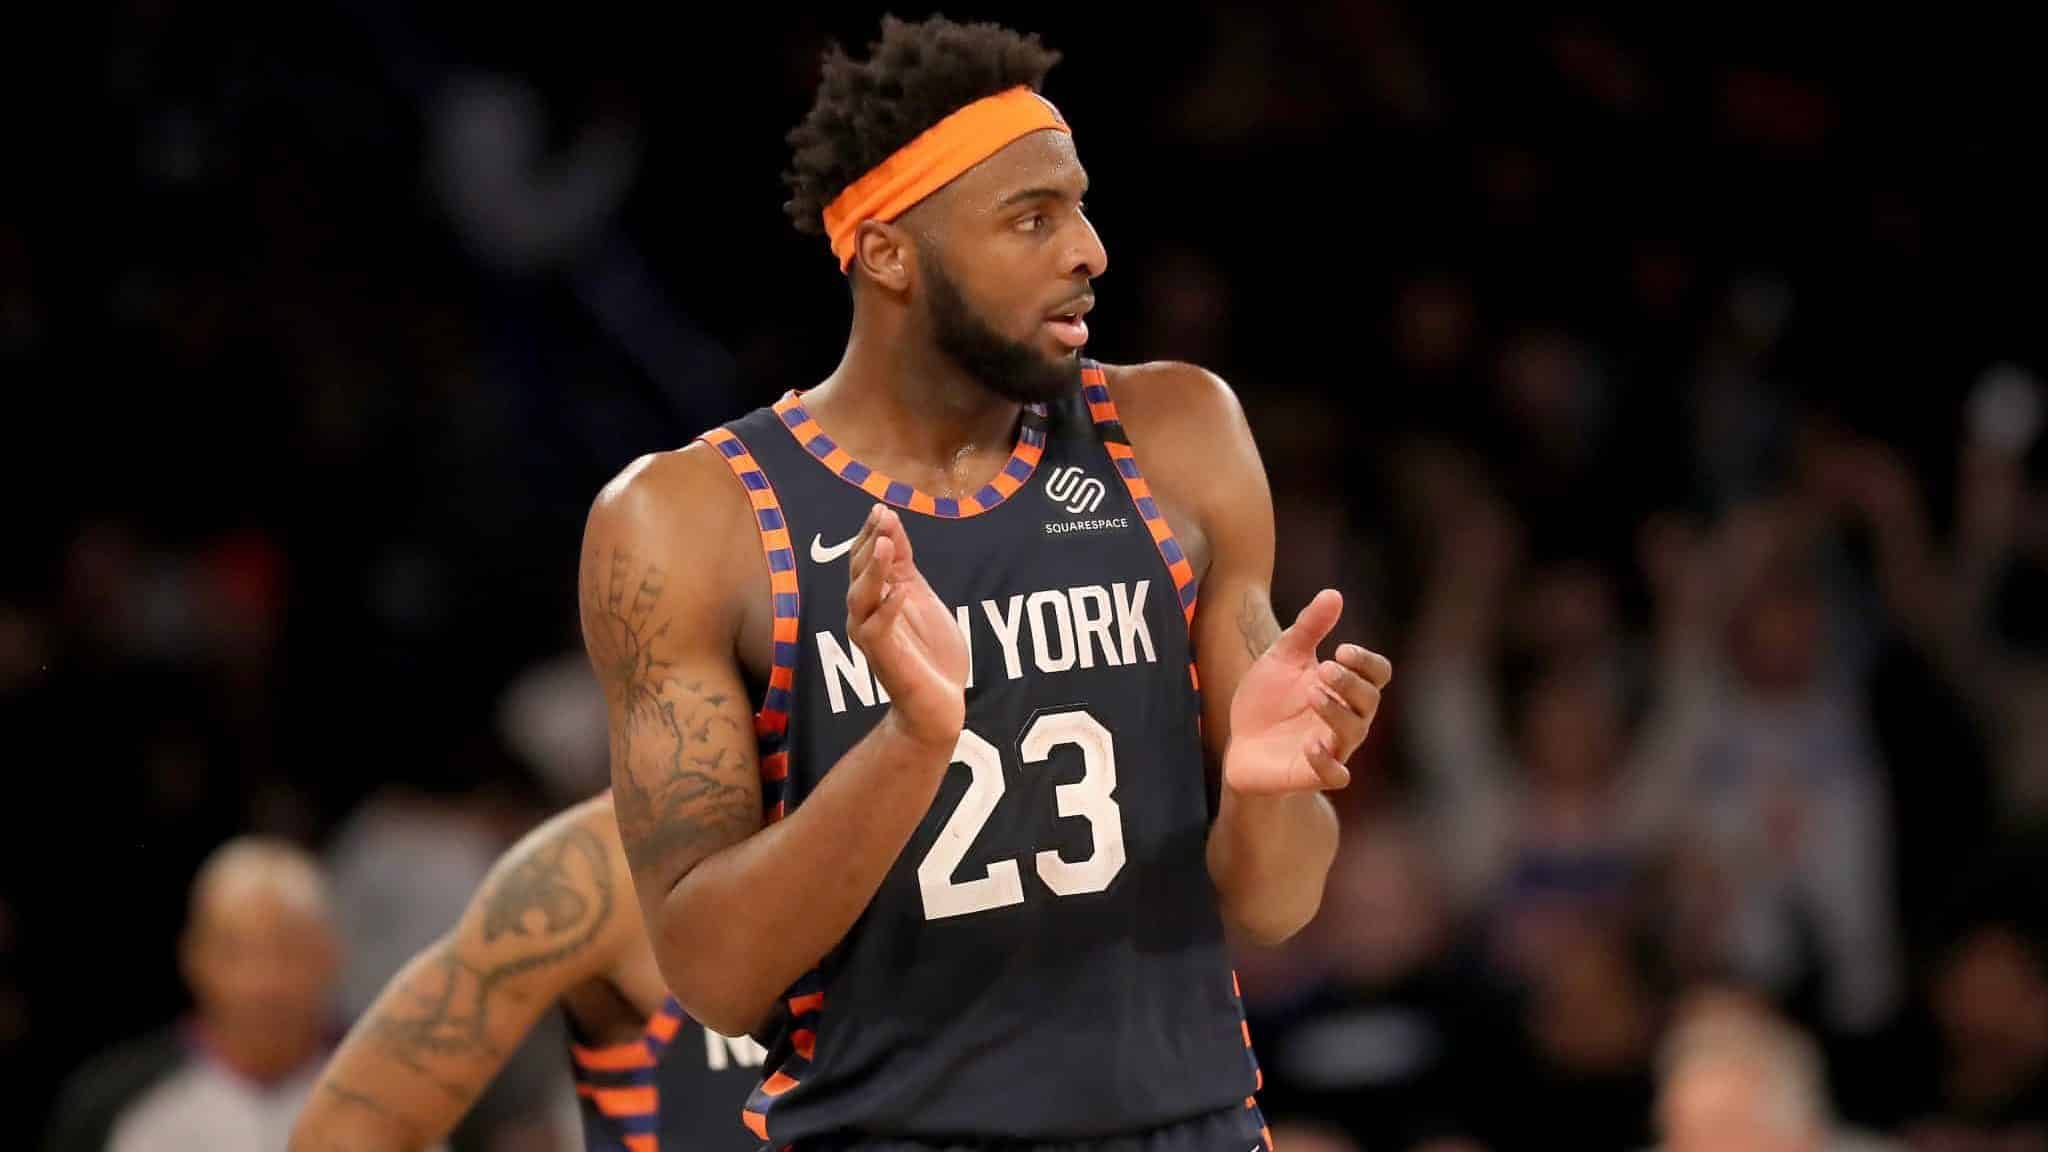 NEW YORK, NEW YORK - FEBRUARY 29: Mitchell Robinson #23 of the New York Knicks celebrates as the game ends against the Chicago Bulls at Madison Square Garden on February 29, 2020 in New York City.The New York Knicks defeated the Chicago Bulls 125-115.NOTE TO USER: User expressly acknowledges and agrees that, by downloading and or using this photograph, User is consenting to the terms and conditions of the Getty Images License Agreement.